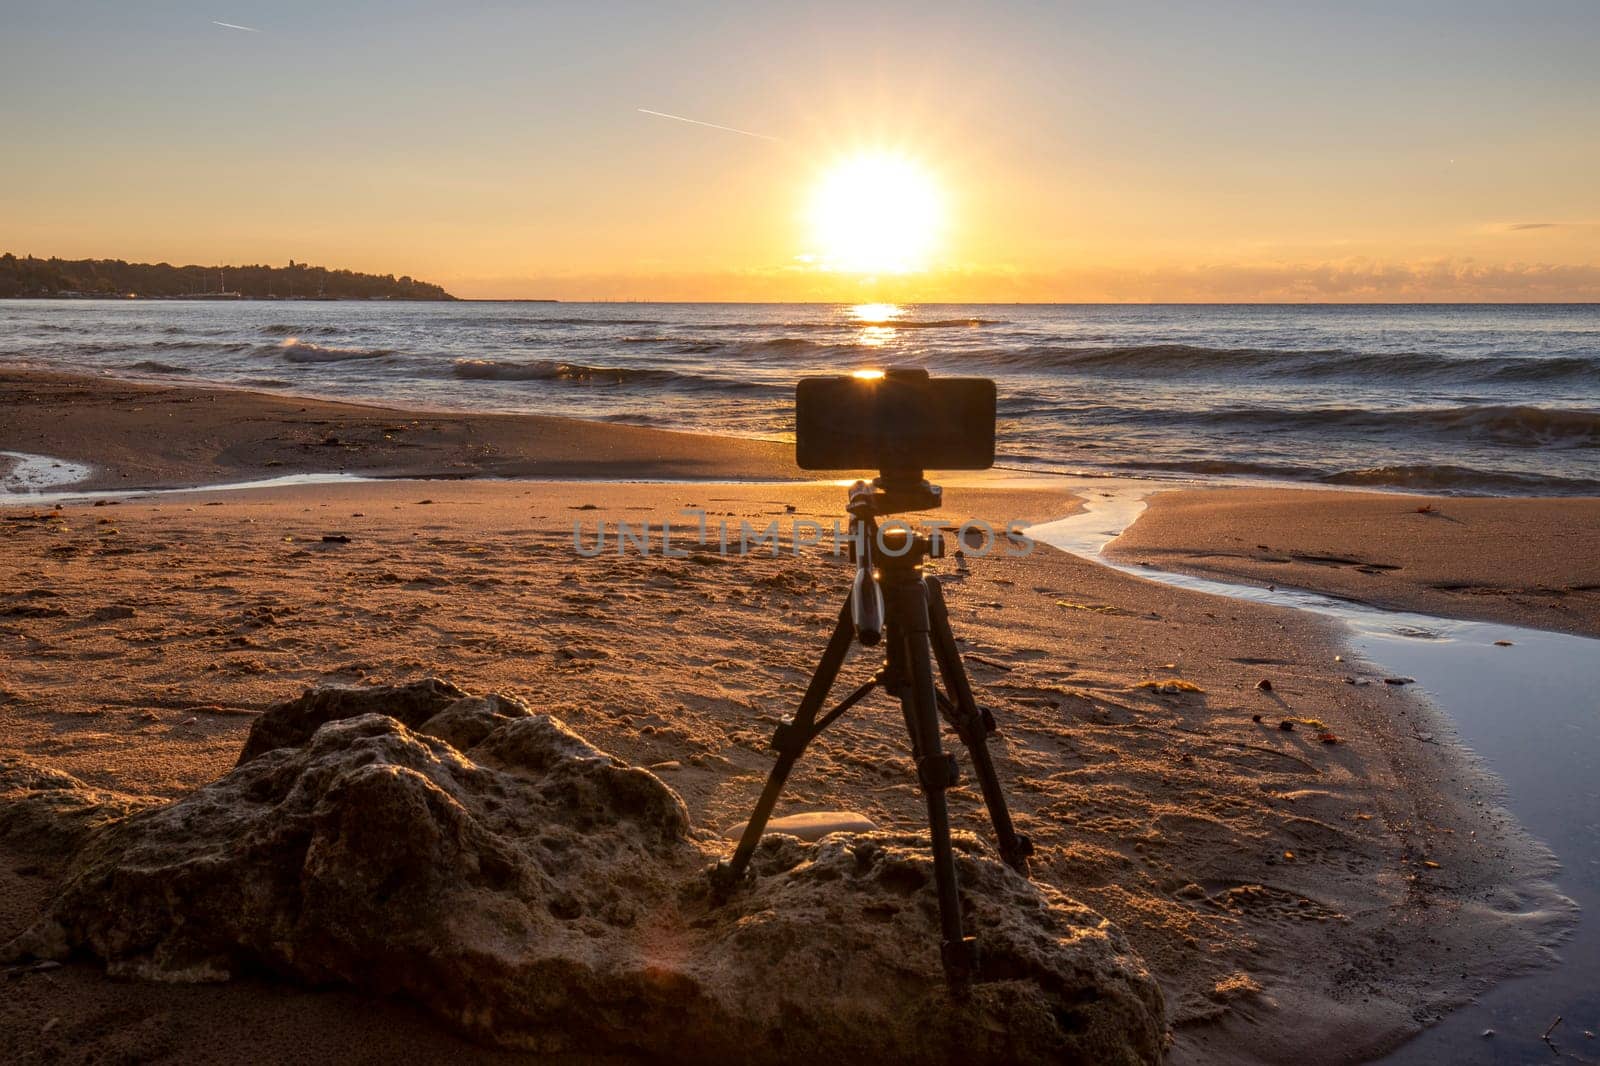 A telephone on a tripod standing on the beach shooting sunrise by EdVal